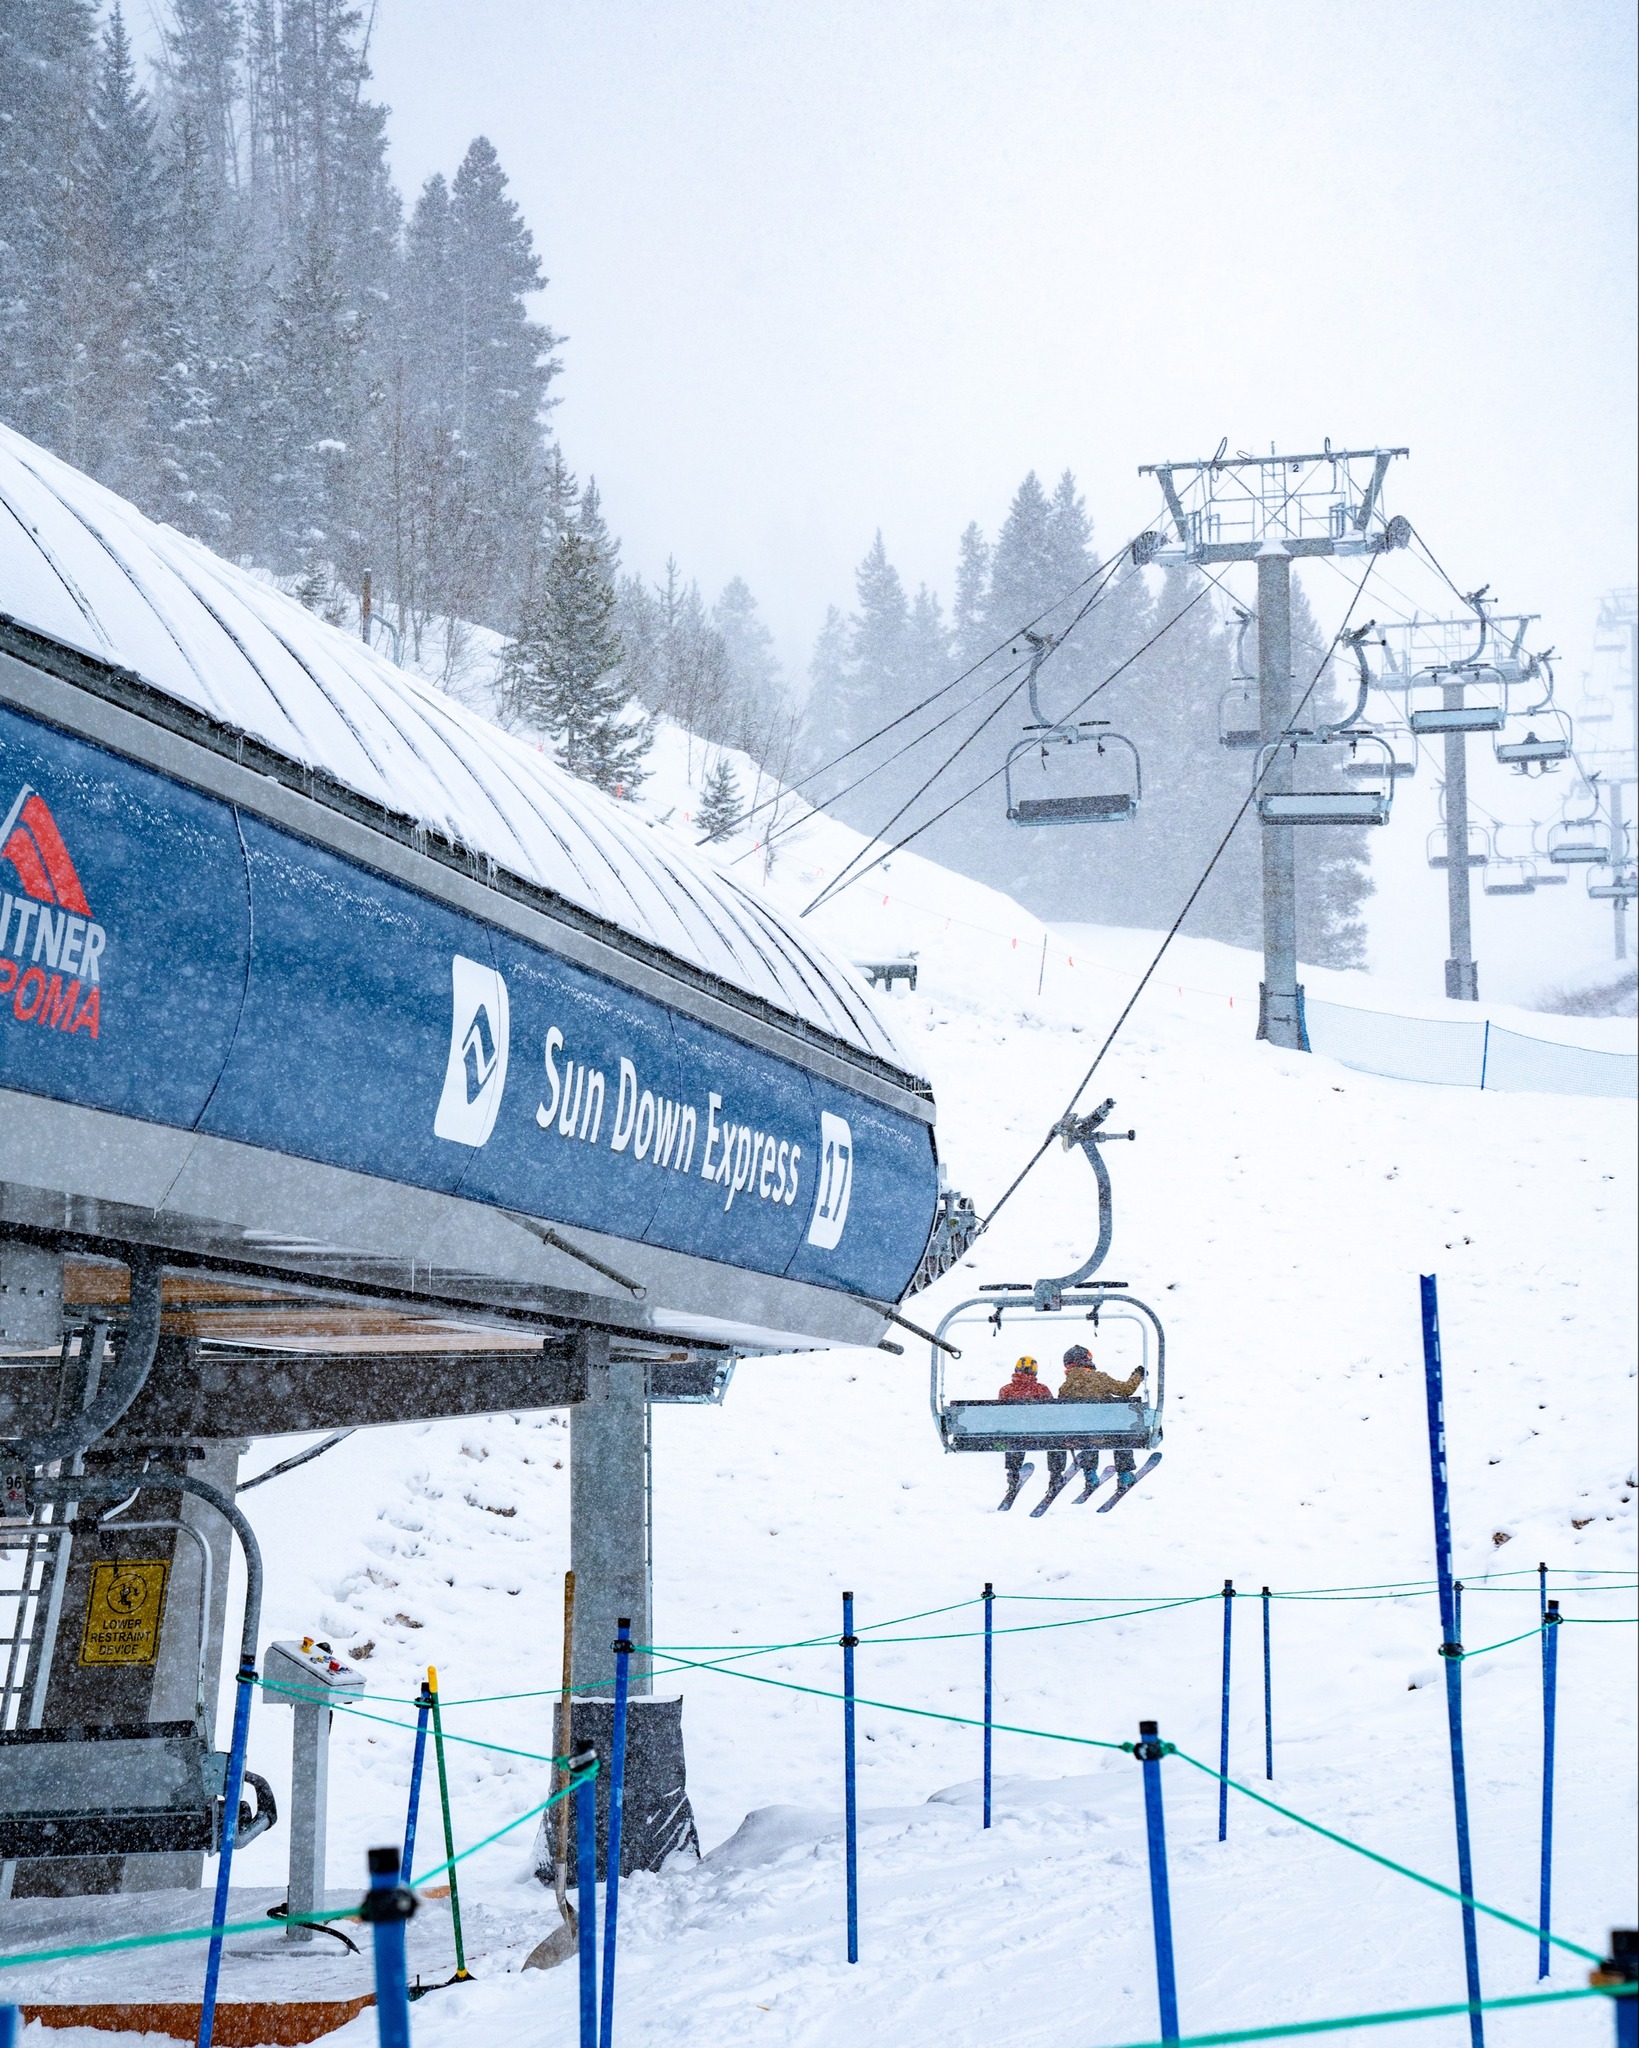 Vail Opens New Sun Down Express Chairlift